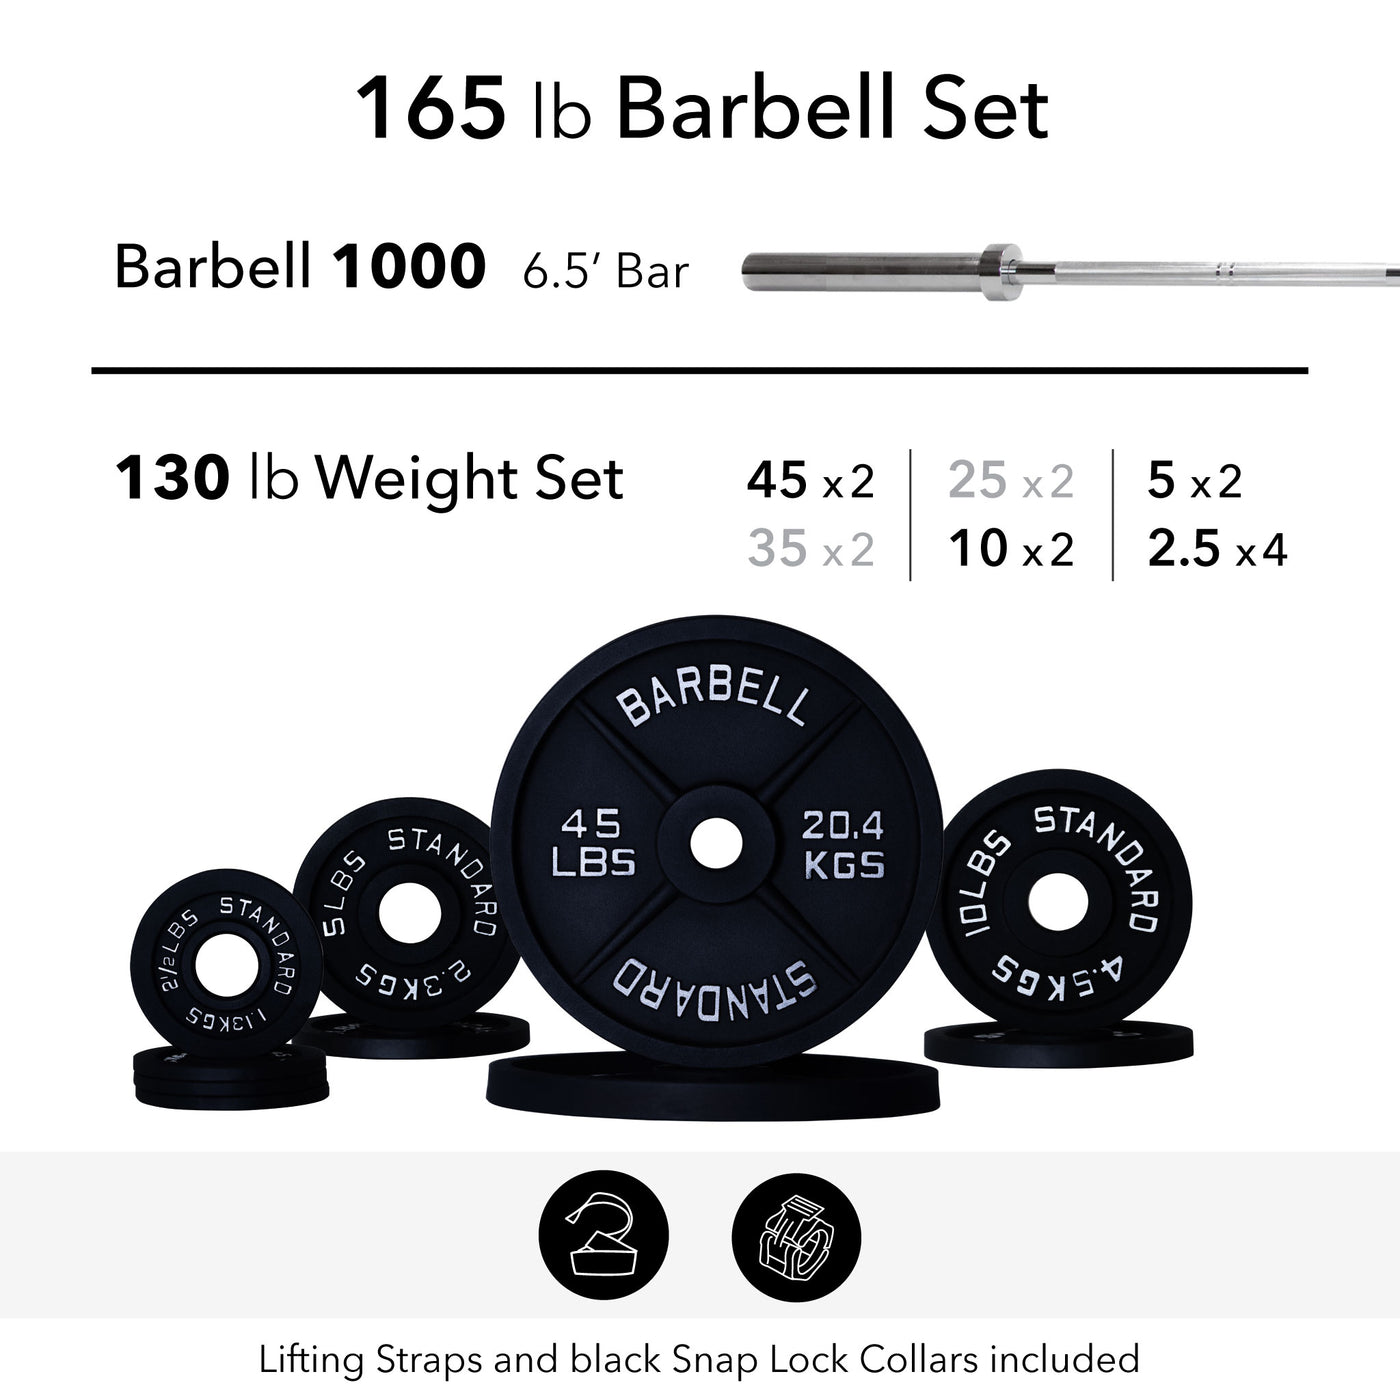 Barbell 1000 Sets